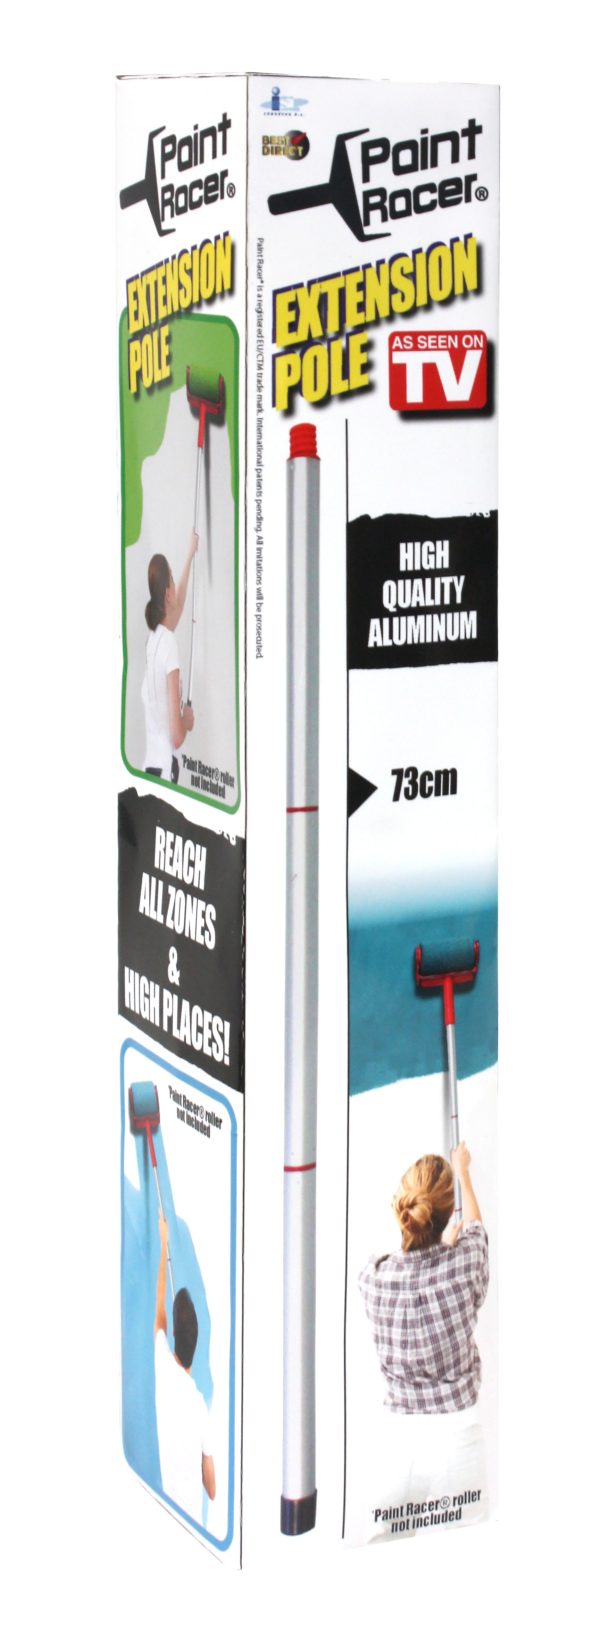 Paint Racer Extension Pole - image of boxed product